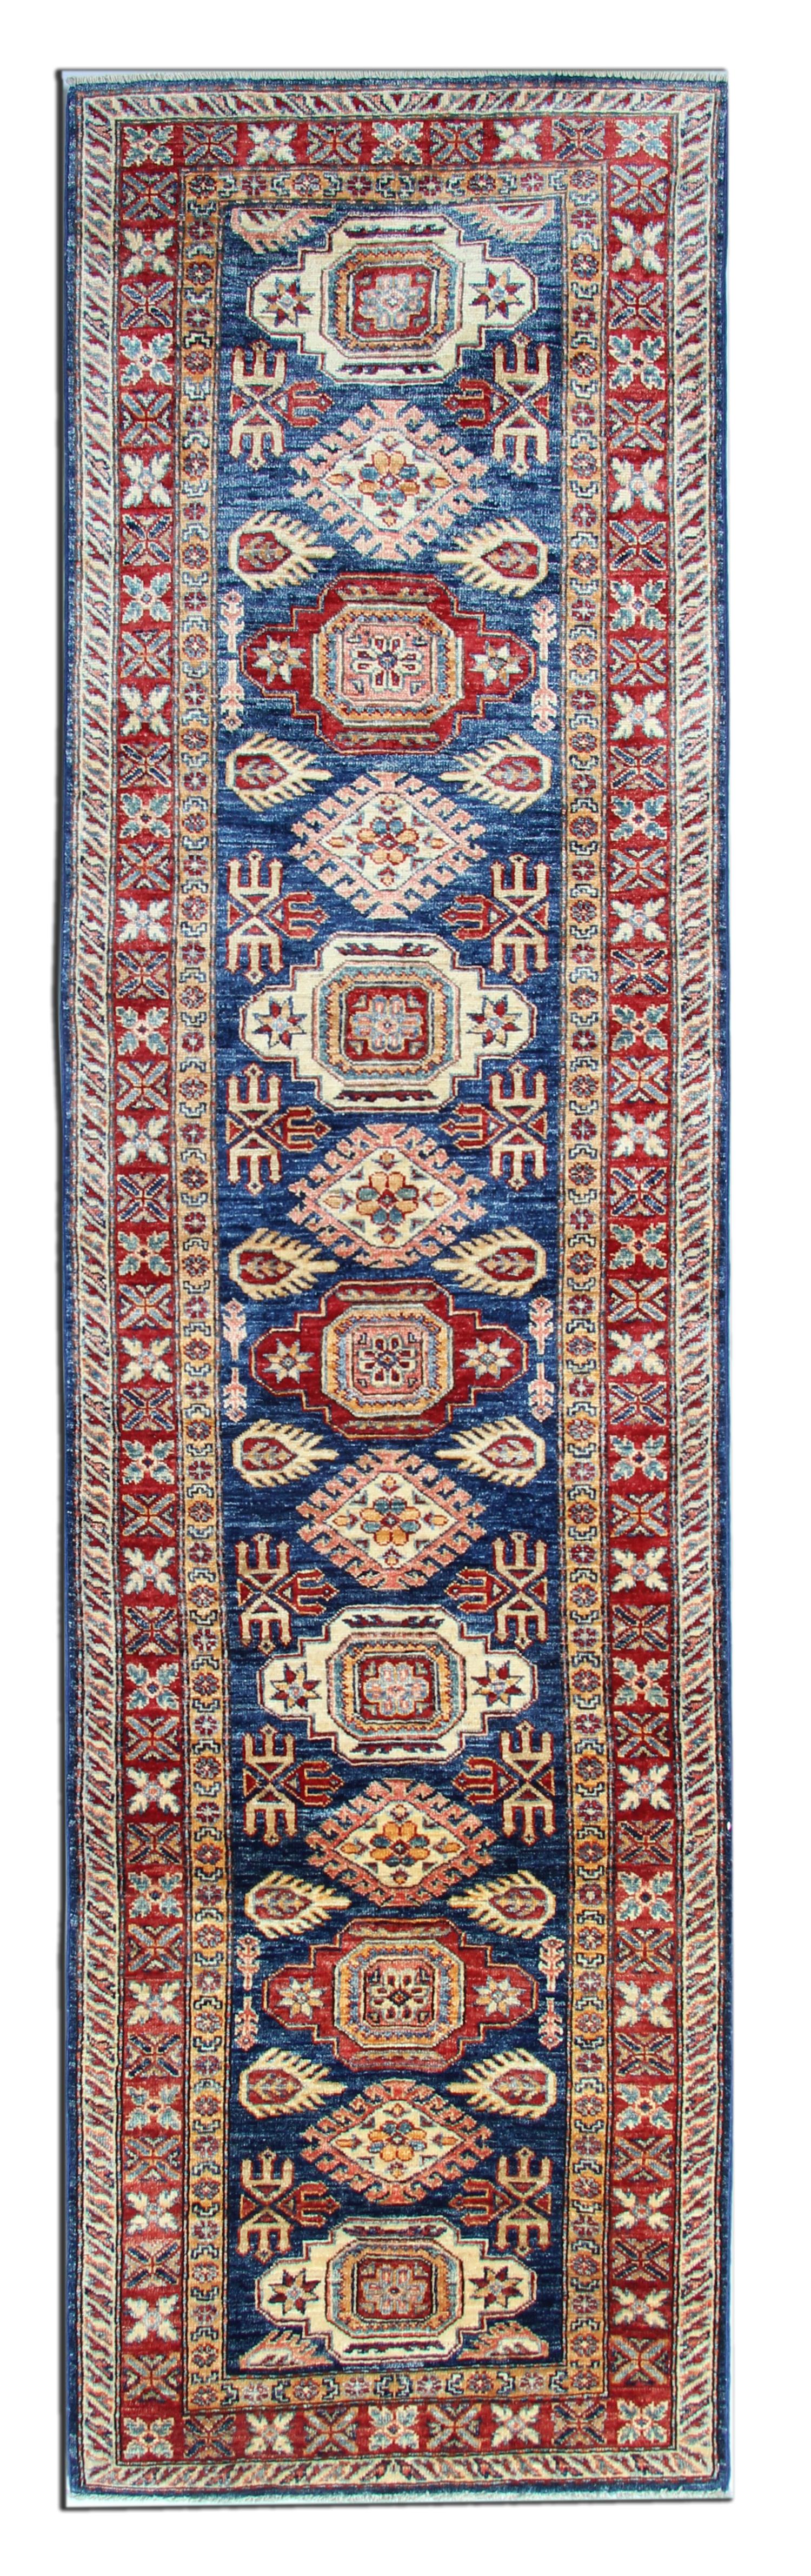 This handmade carpet runner's new traditional handwoven Kazak rug comes in a striking colour combination. This Blue rug has cream, red and caramel accent colours woven through both the centre and border. The pattern depicted on this hand-woven